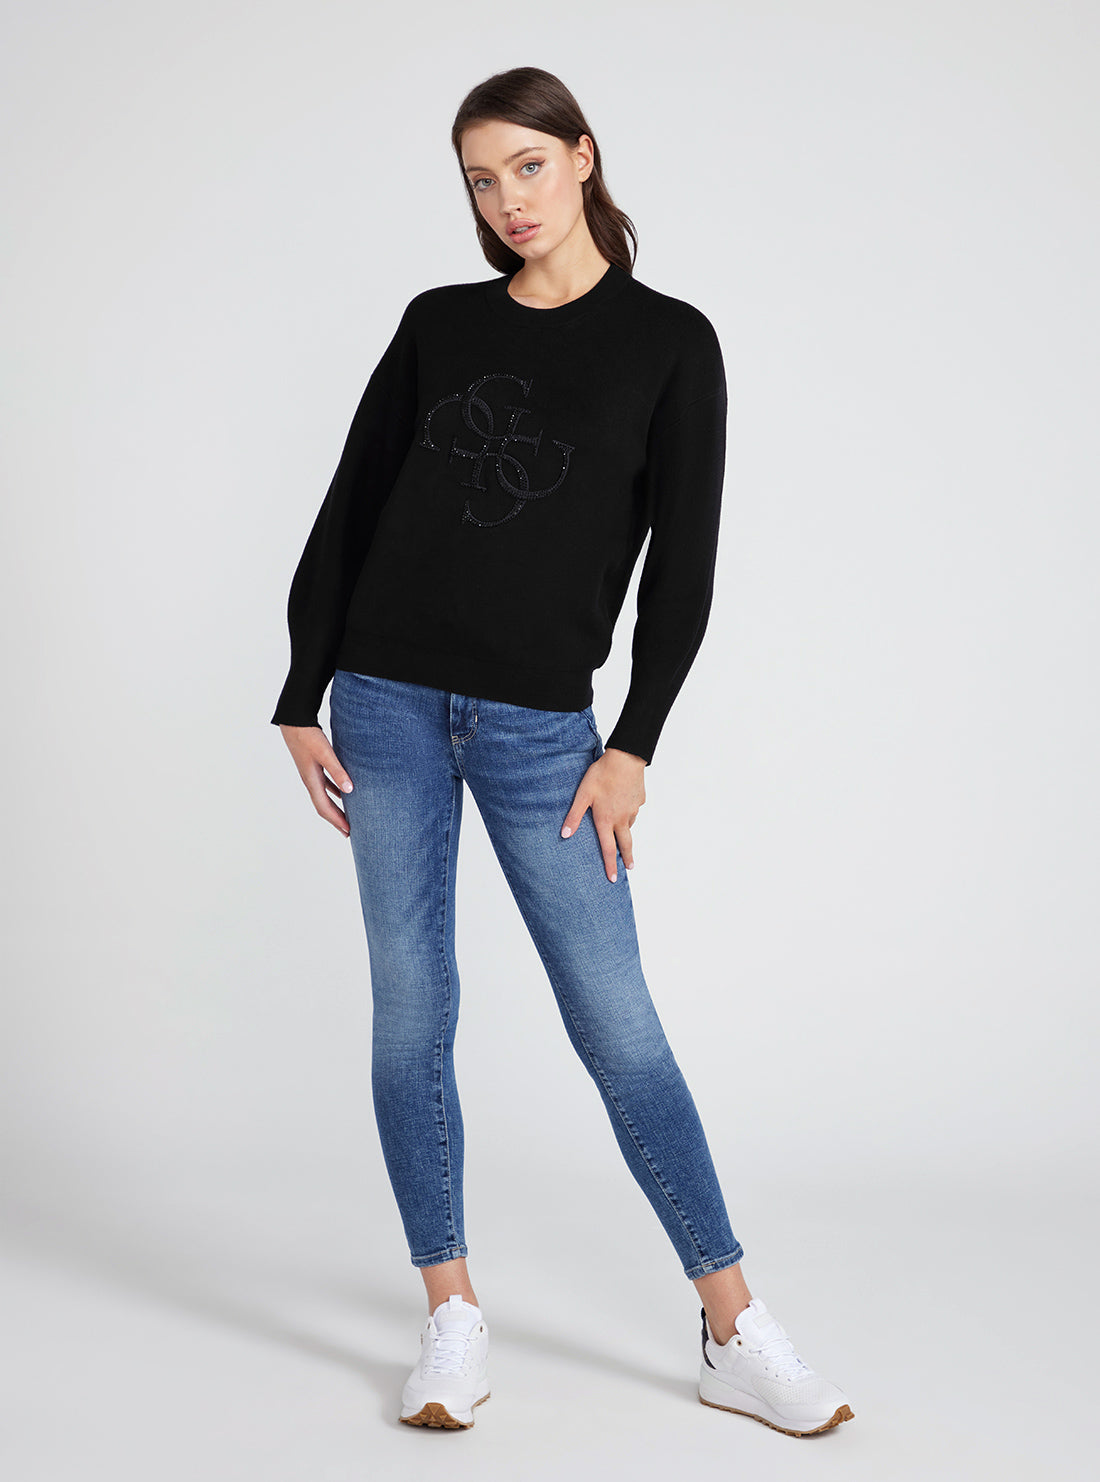 GUESS Long Sleeve Leonor Logo Sweater full view